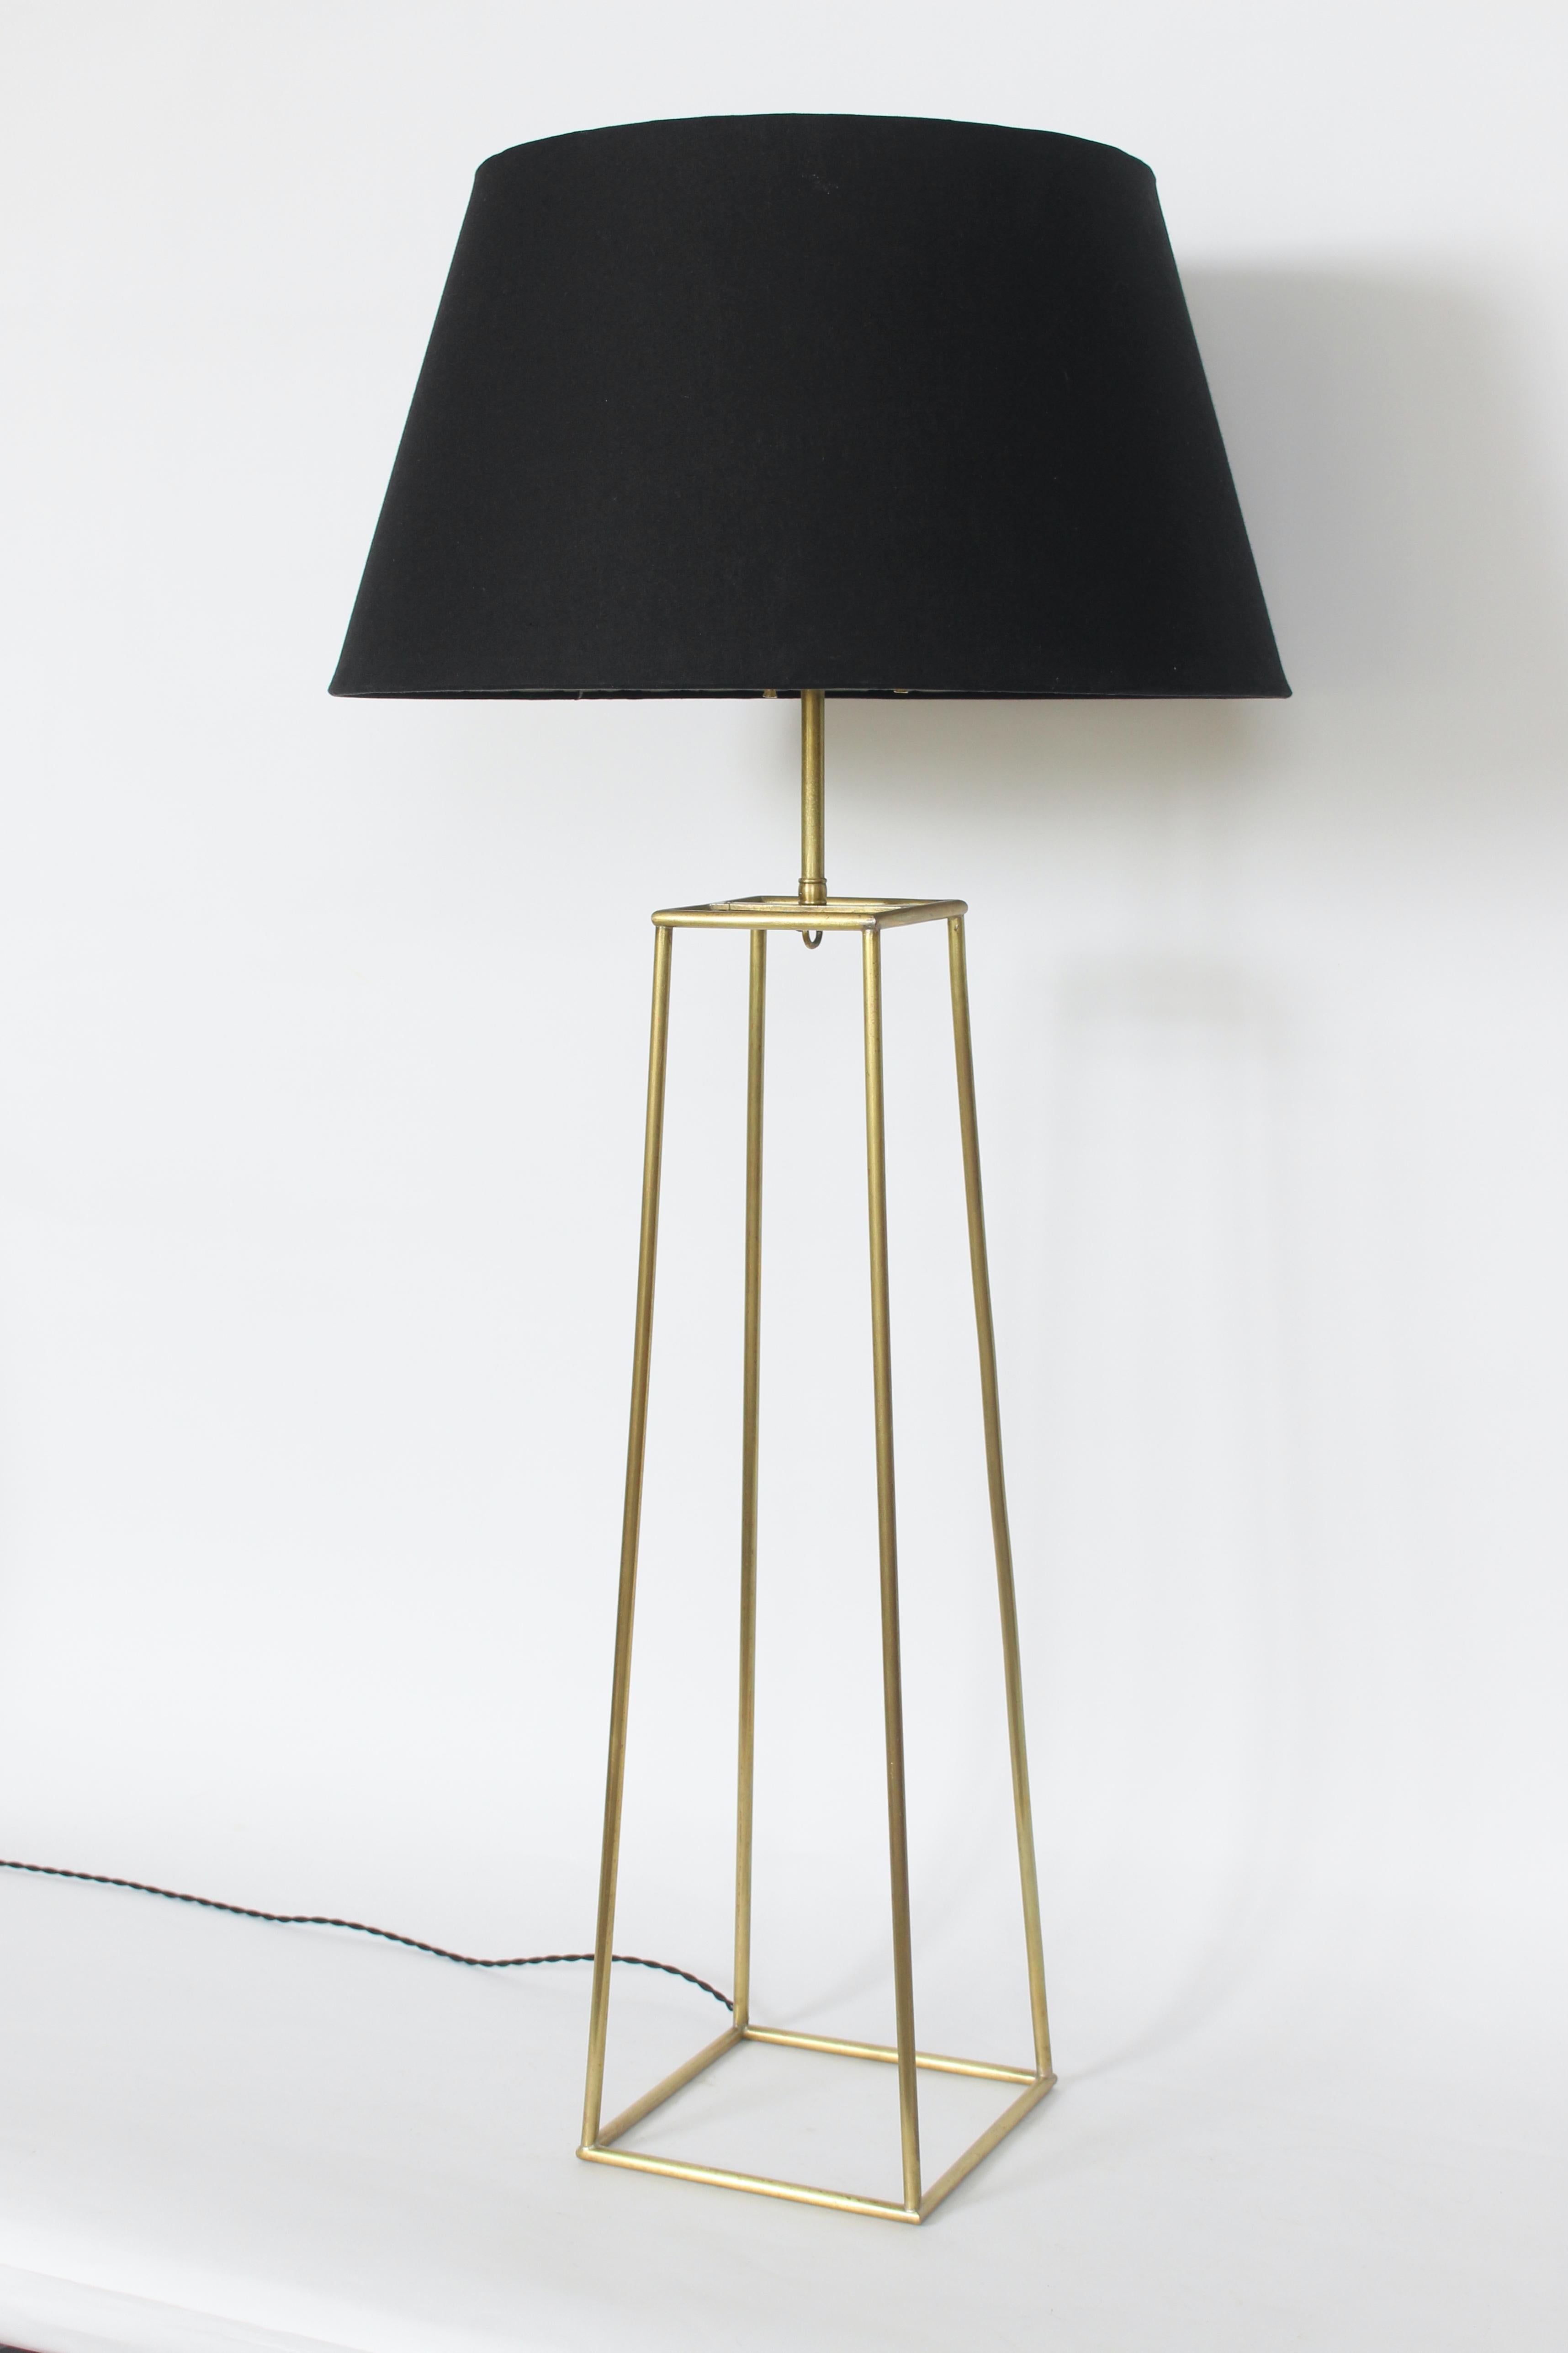 Substantial Tommi Parzinger Style Brass Open Box Form Table Lamp, 1950s For Sale 13